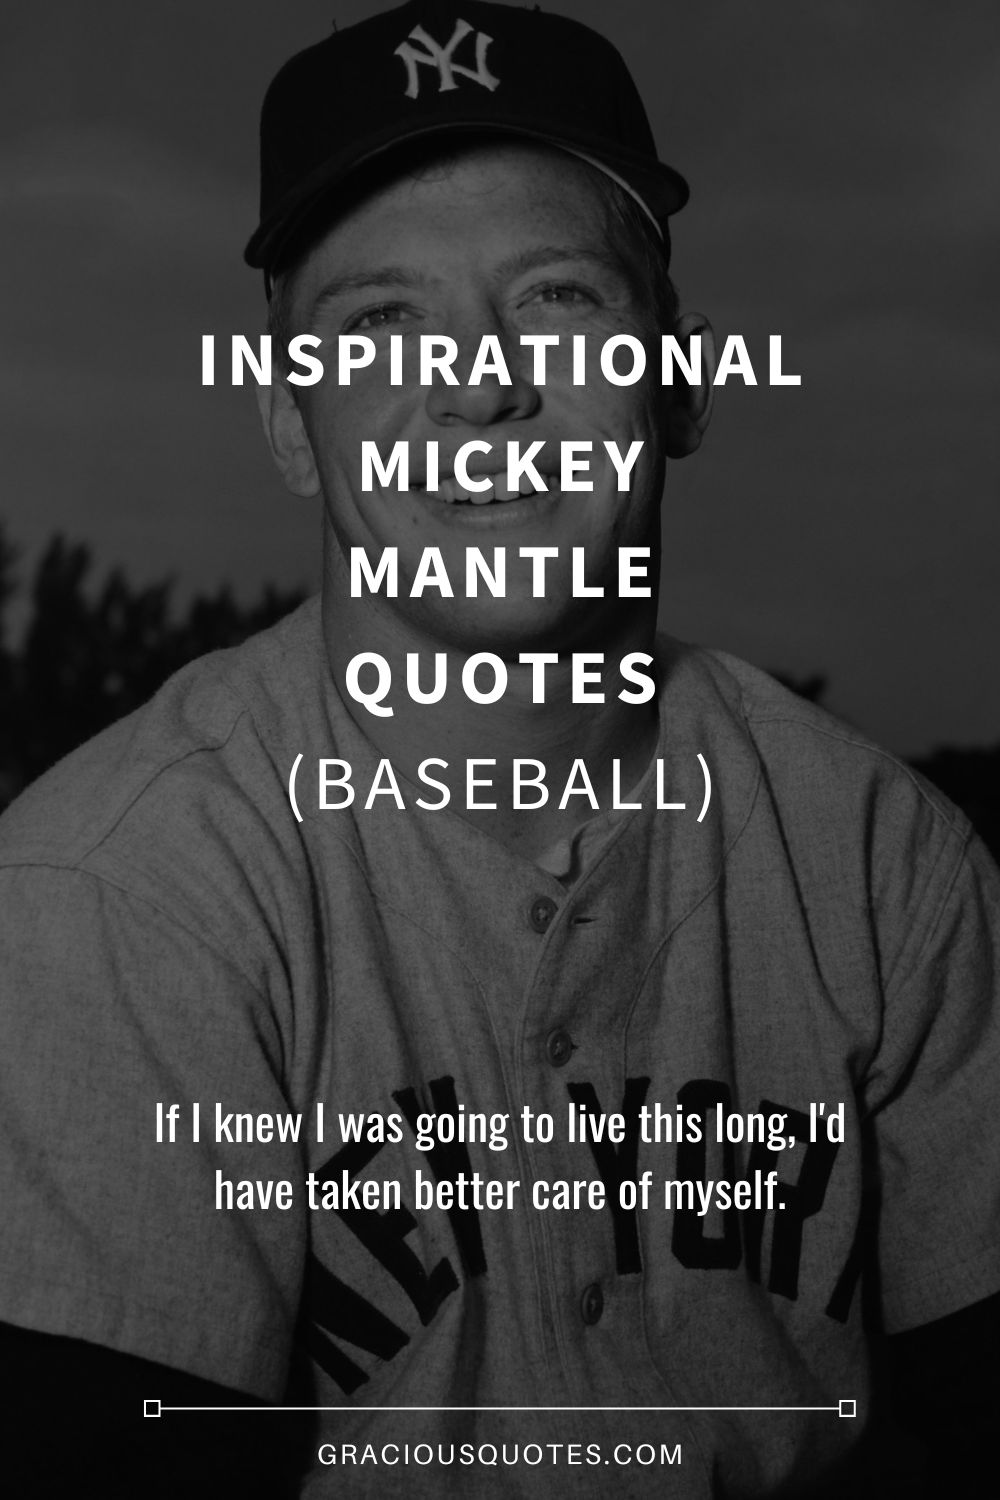 Inspirational Mickey Mantle Quotes (BASEBALL) - Gracious Quotes